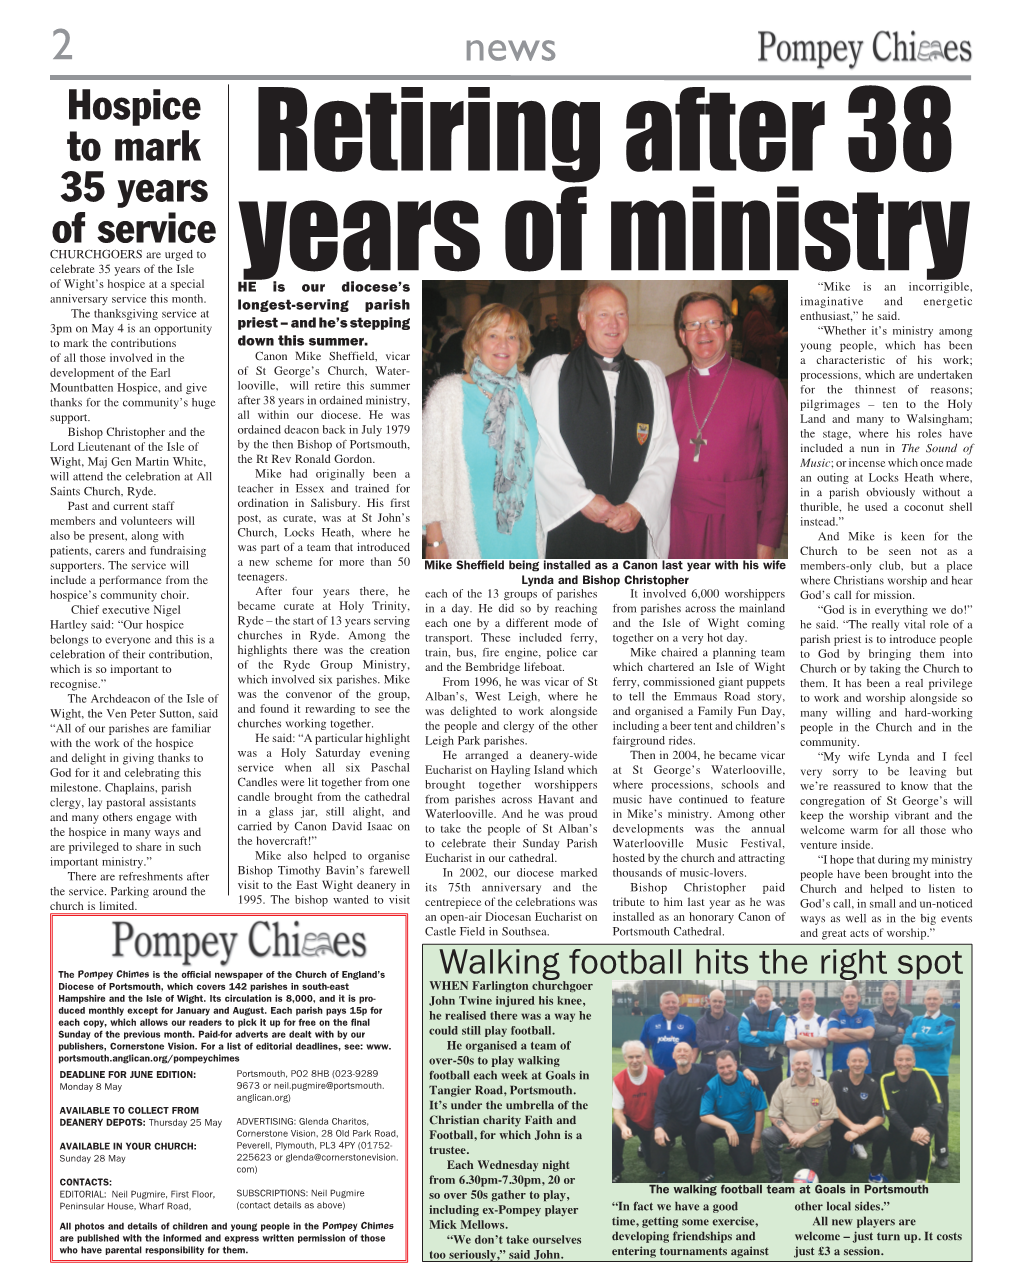 Retiring After 38 Years of Ministry